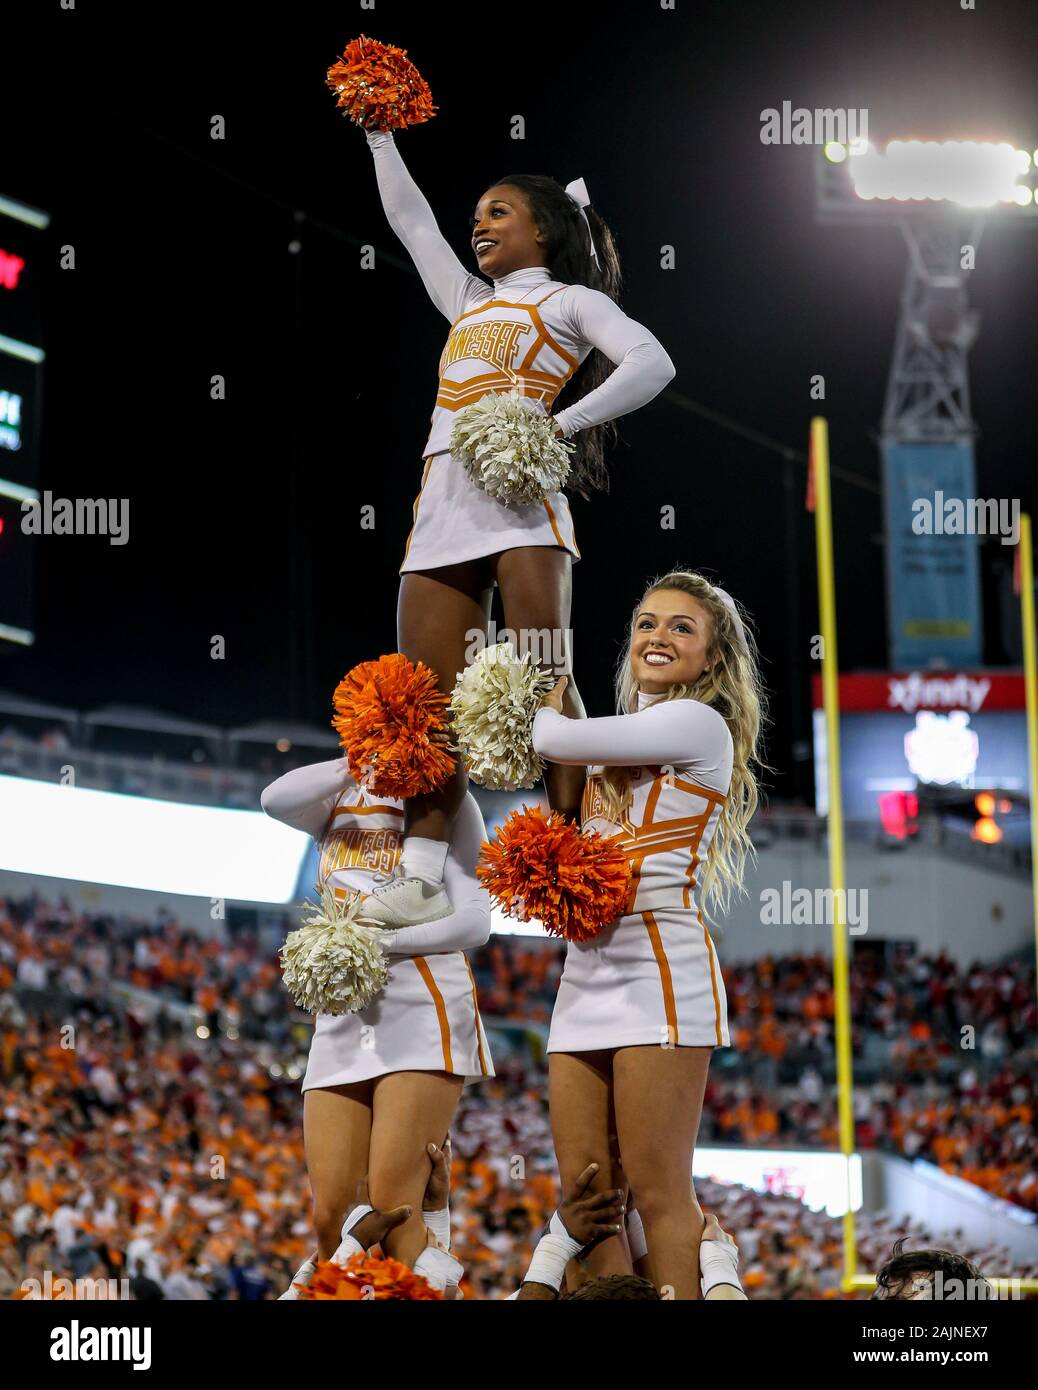 Jacksonville, FL, USA. 2nd Jan, 2020. The Tennessee cheerleaders perform a pyramid stunt on the sidelines during the TaxSlayer Gator Bowl football game between the Indiana Hoosiers and the Tennessee Volunteers at TIAA Bank Field in Jacksonville, FL. Kyle Okita/CSM/Alamy Live News Stock Photo